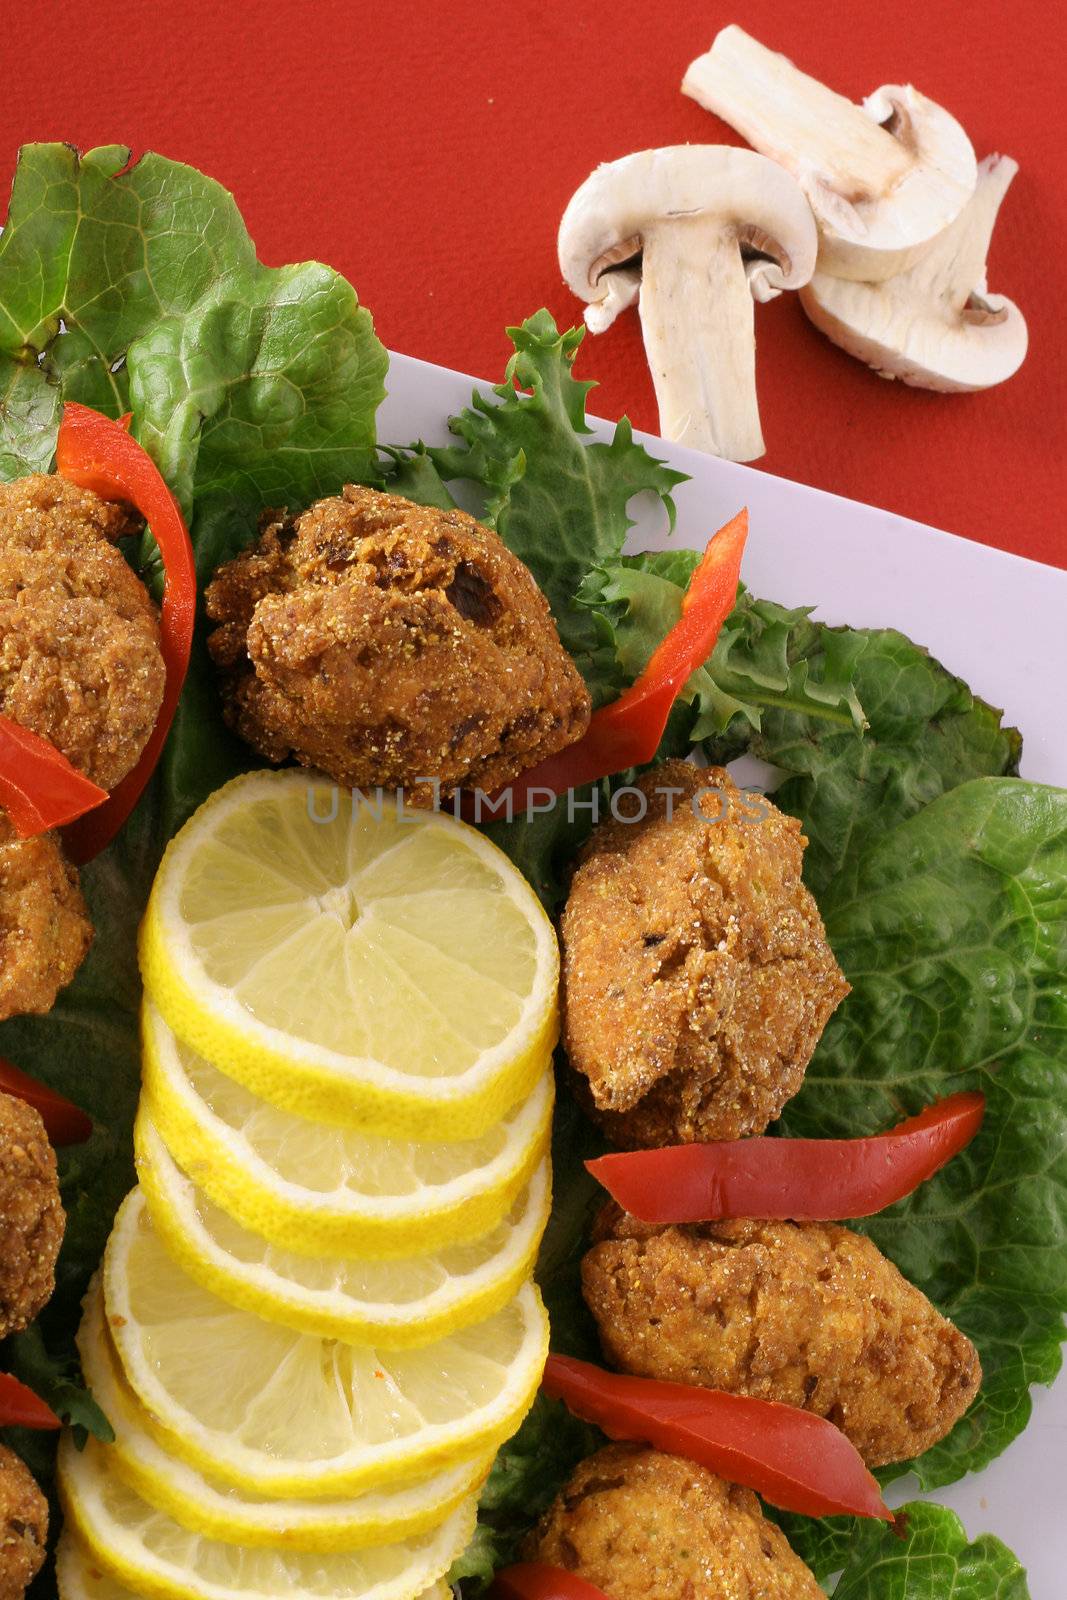 shot of crab cakes and lemon slices by creativestock